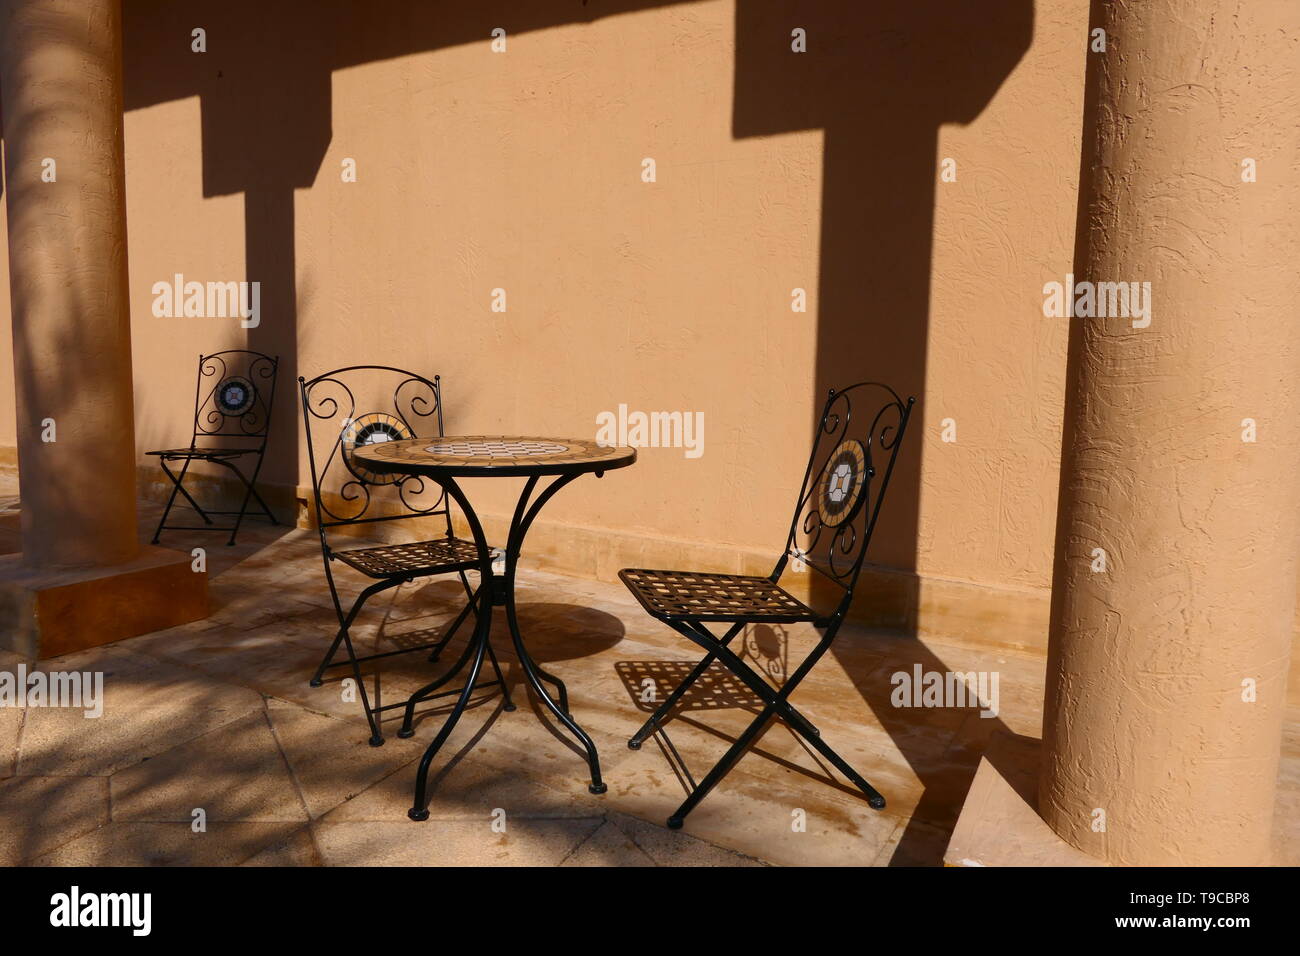 Some coffee chairs and tables in the historic part of Diriyah in Saudi Arabia Stock Photo